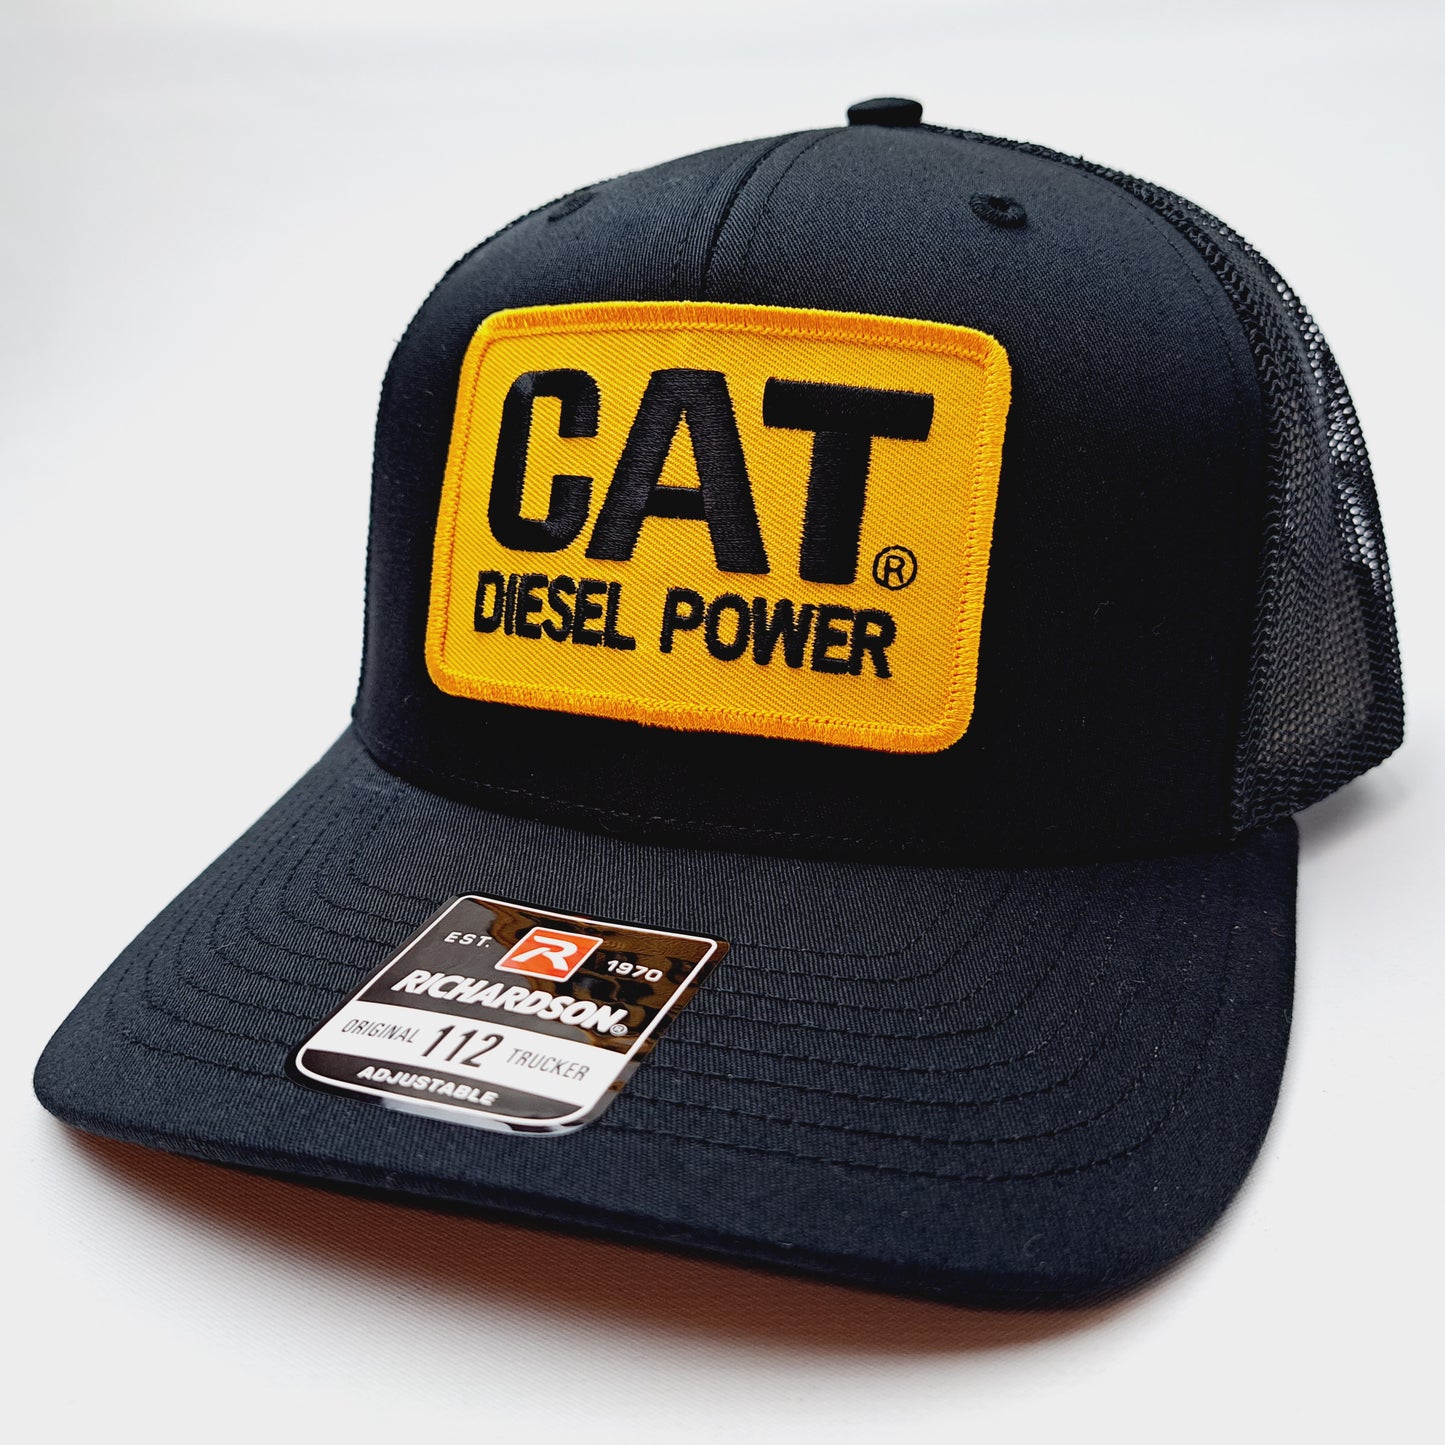 CAT Diesel Power Embroidered Patch Richardson 112 Curved Bill Trucker Mesh Snapback Cap Hat Black